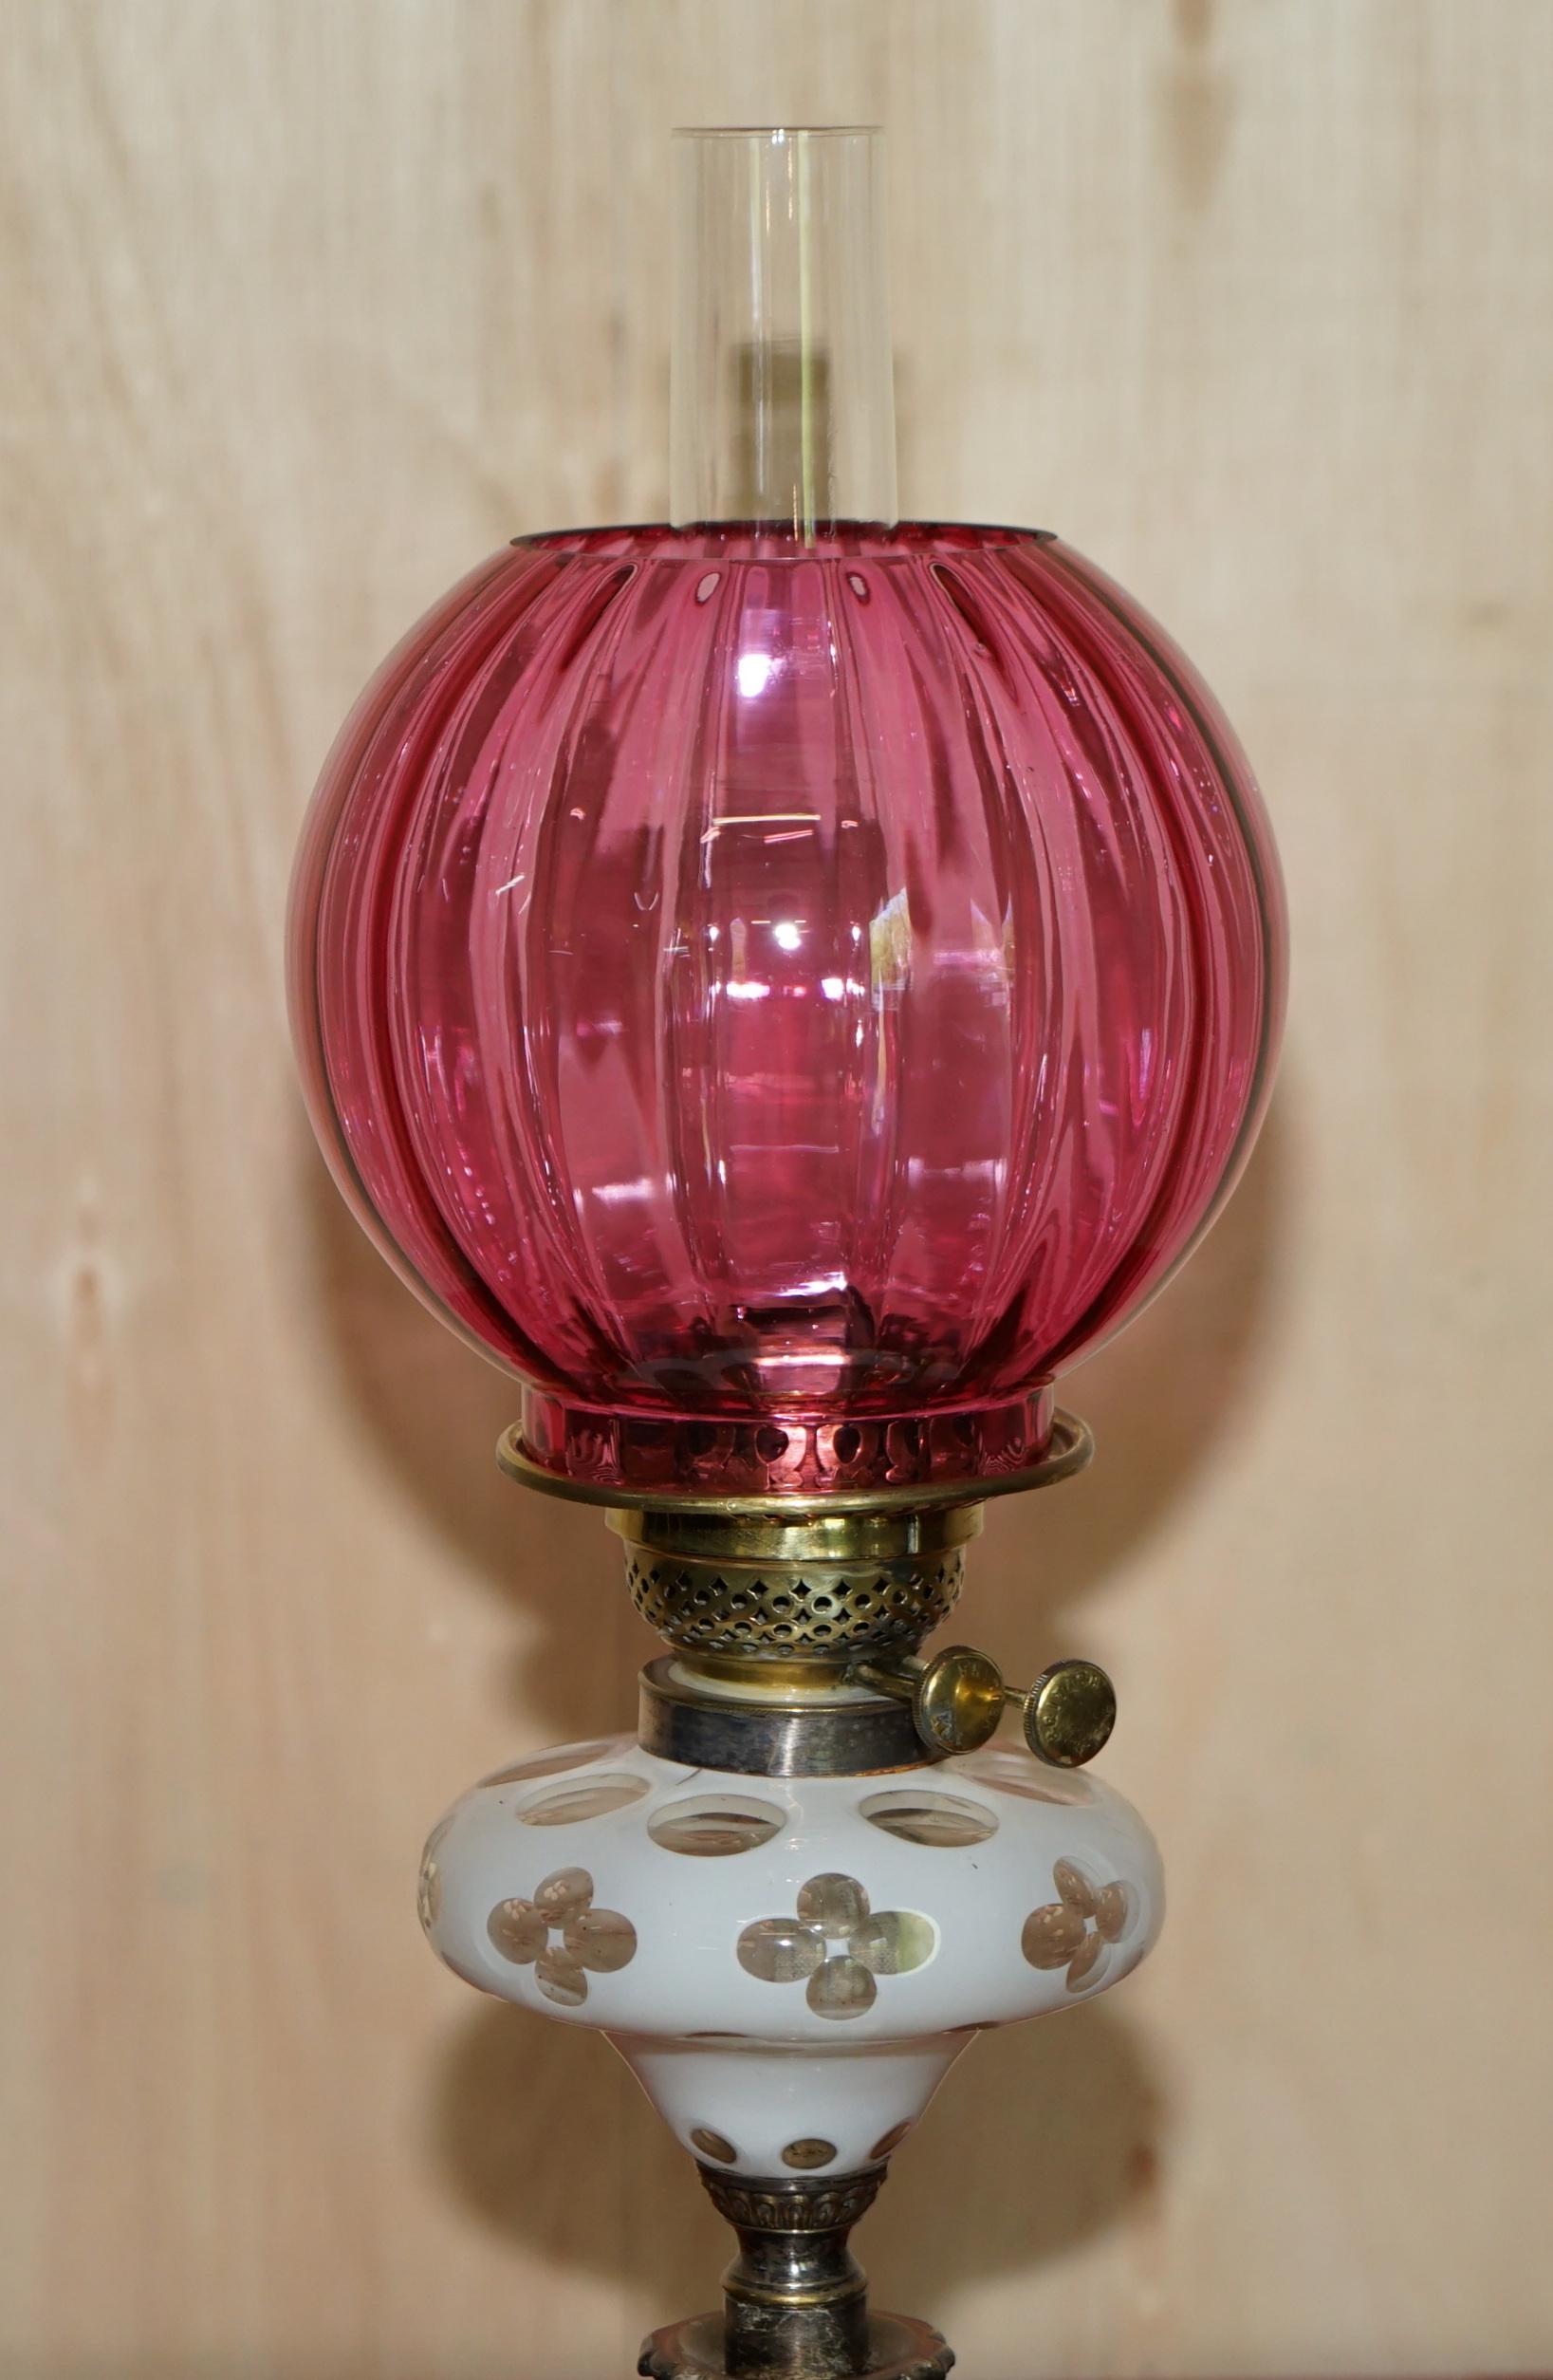 We are delighted to offer for sale this stunning Victorian, repousse brass base oil lamp with etched glass floral body and Ruby glass shade

I have a suite of seven Victorian oil lamps

The lamp has a rare repousse base with etched glass oil